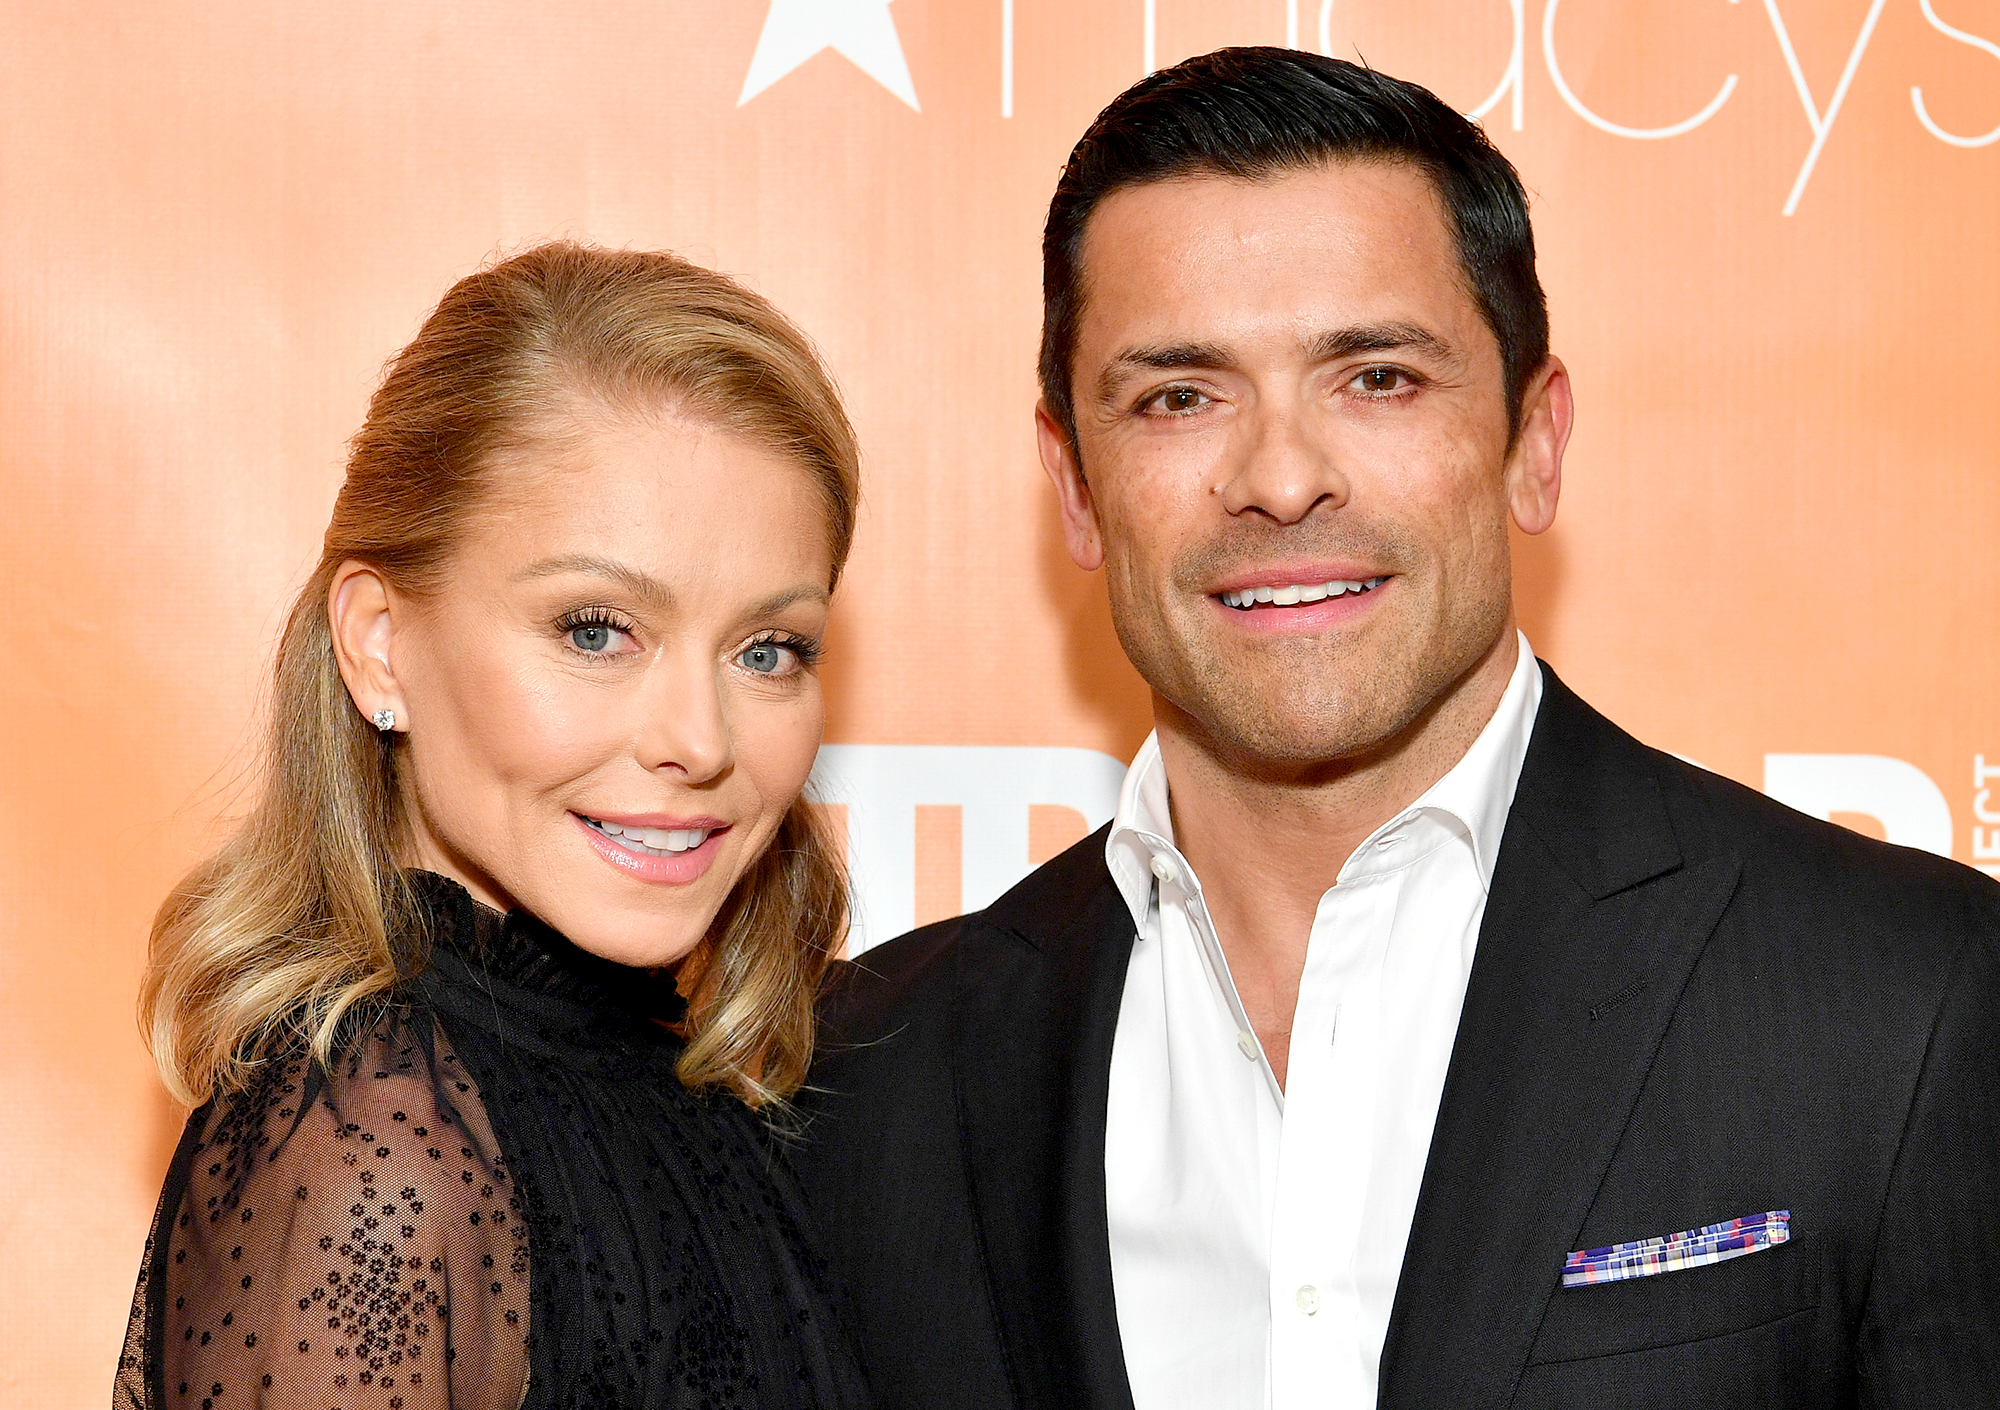 Petite Girl Porn Captions Mistress - Kelly Ripa and Mark Consuelos: A Timeline of Their Relationship